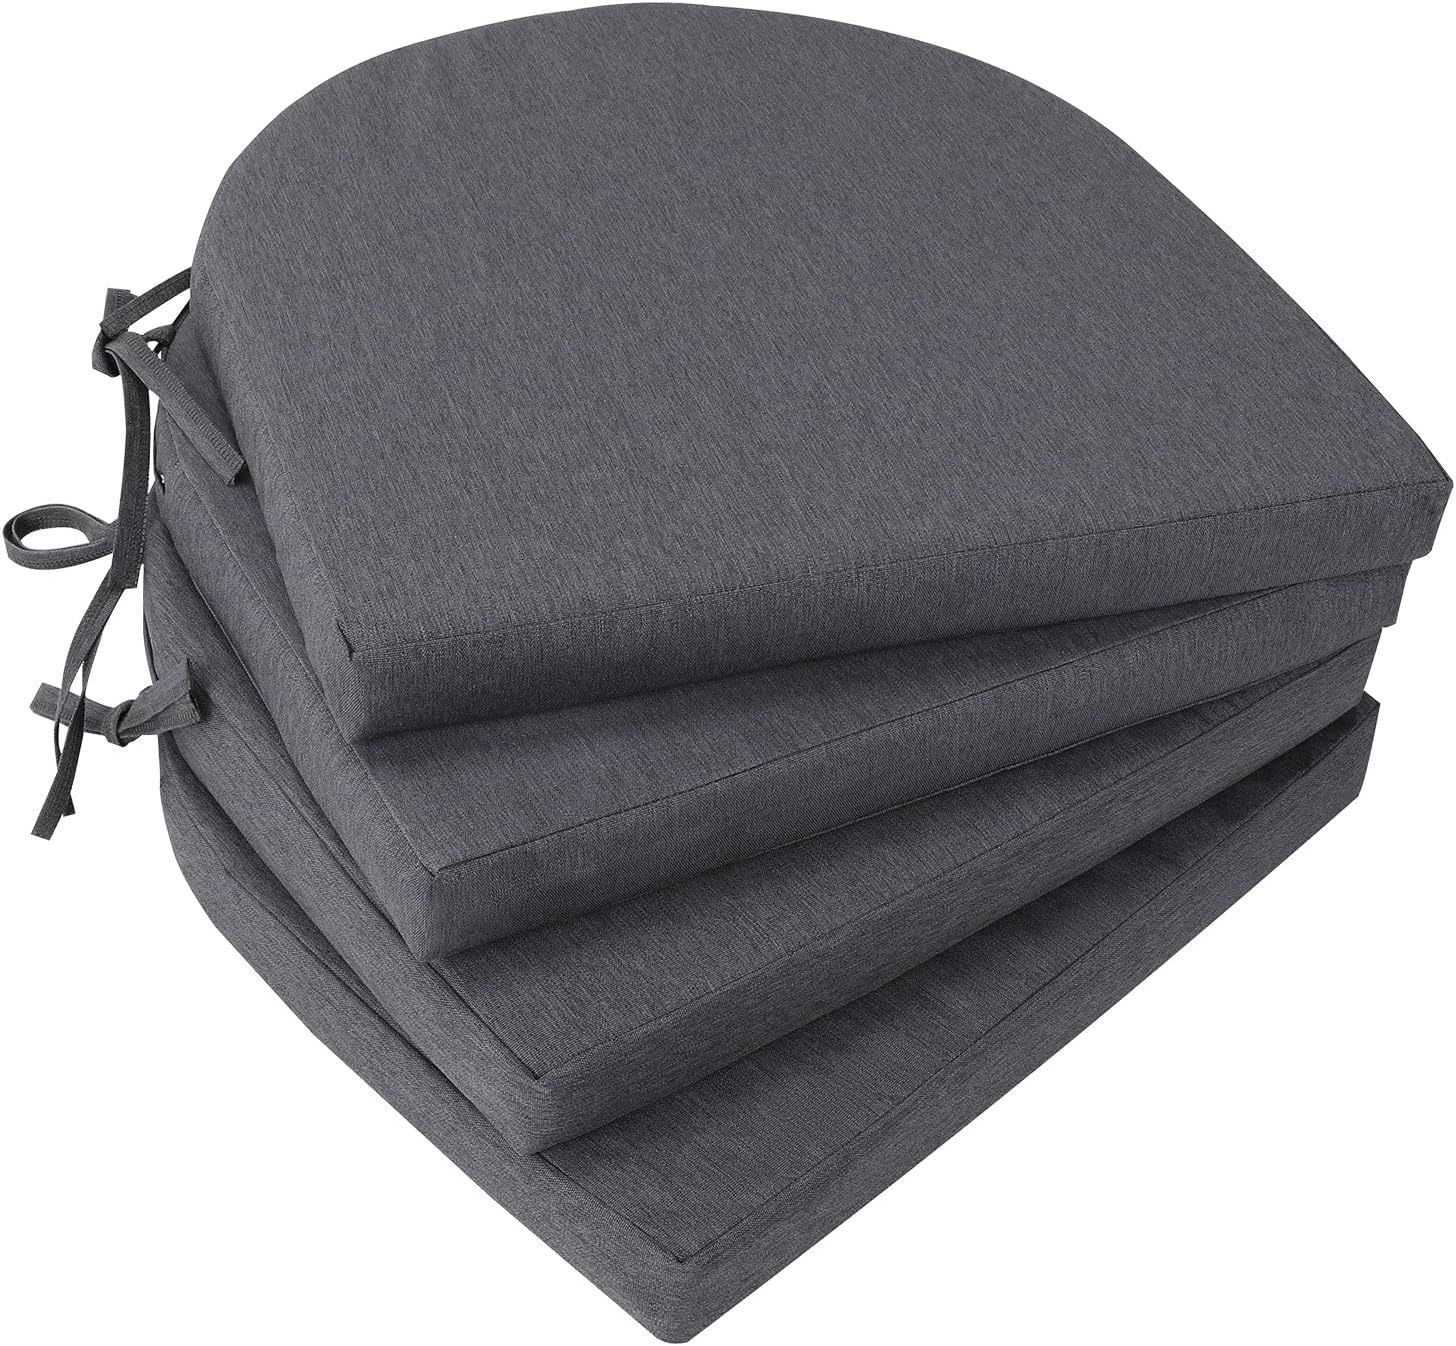 Topotdor Outdoor Chair Cushions Set of 4, Waterproof Patio Chair Cushions for Outdoor Furniture, Round Corner Seat Chair Pads with Ties for Patio Gard